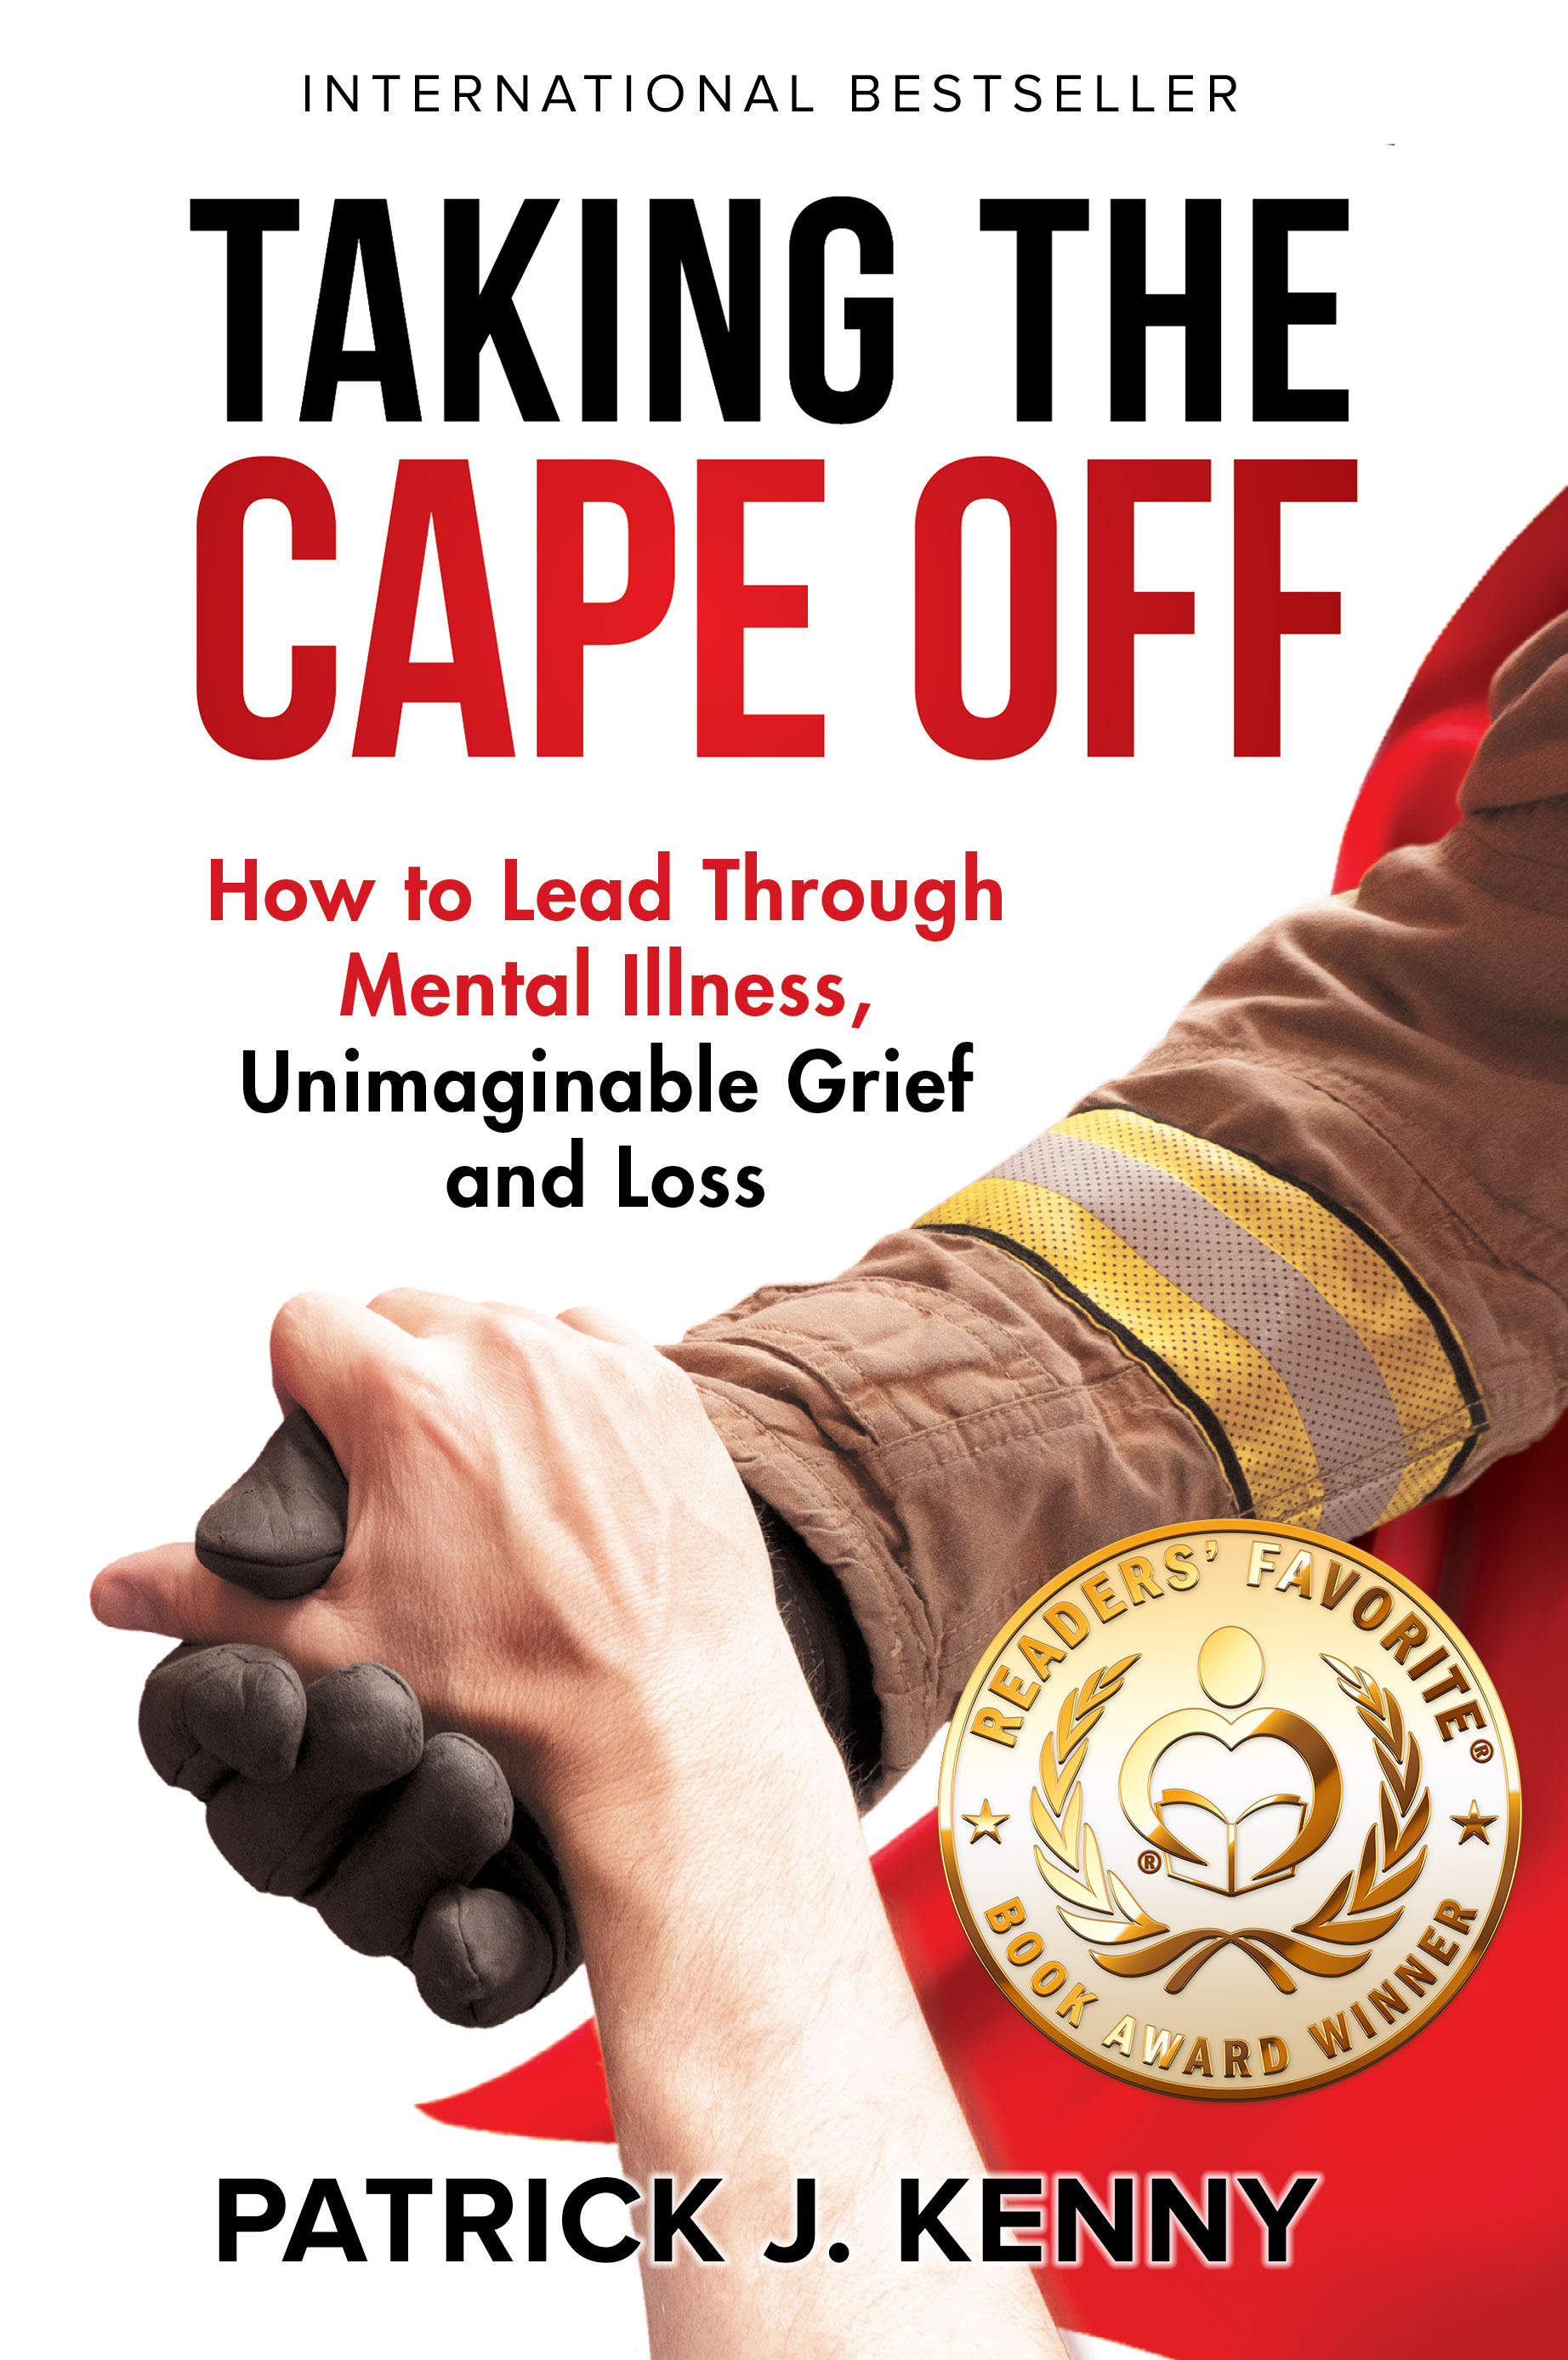 TAKING-THE-CAPE-OFF_Readers_Favorite-Gold-Seal